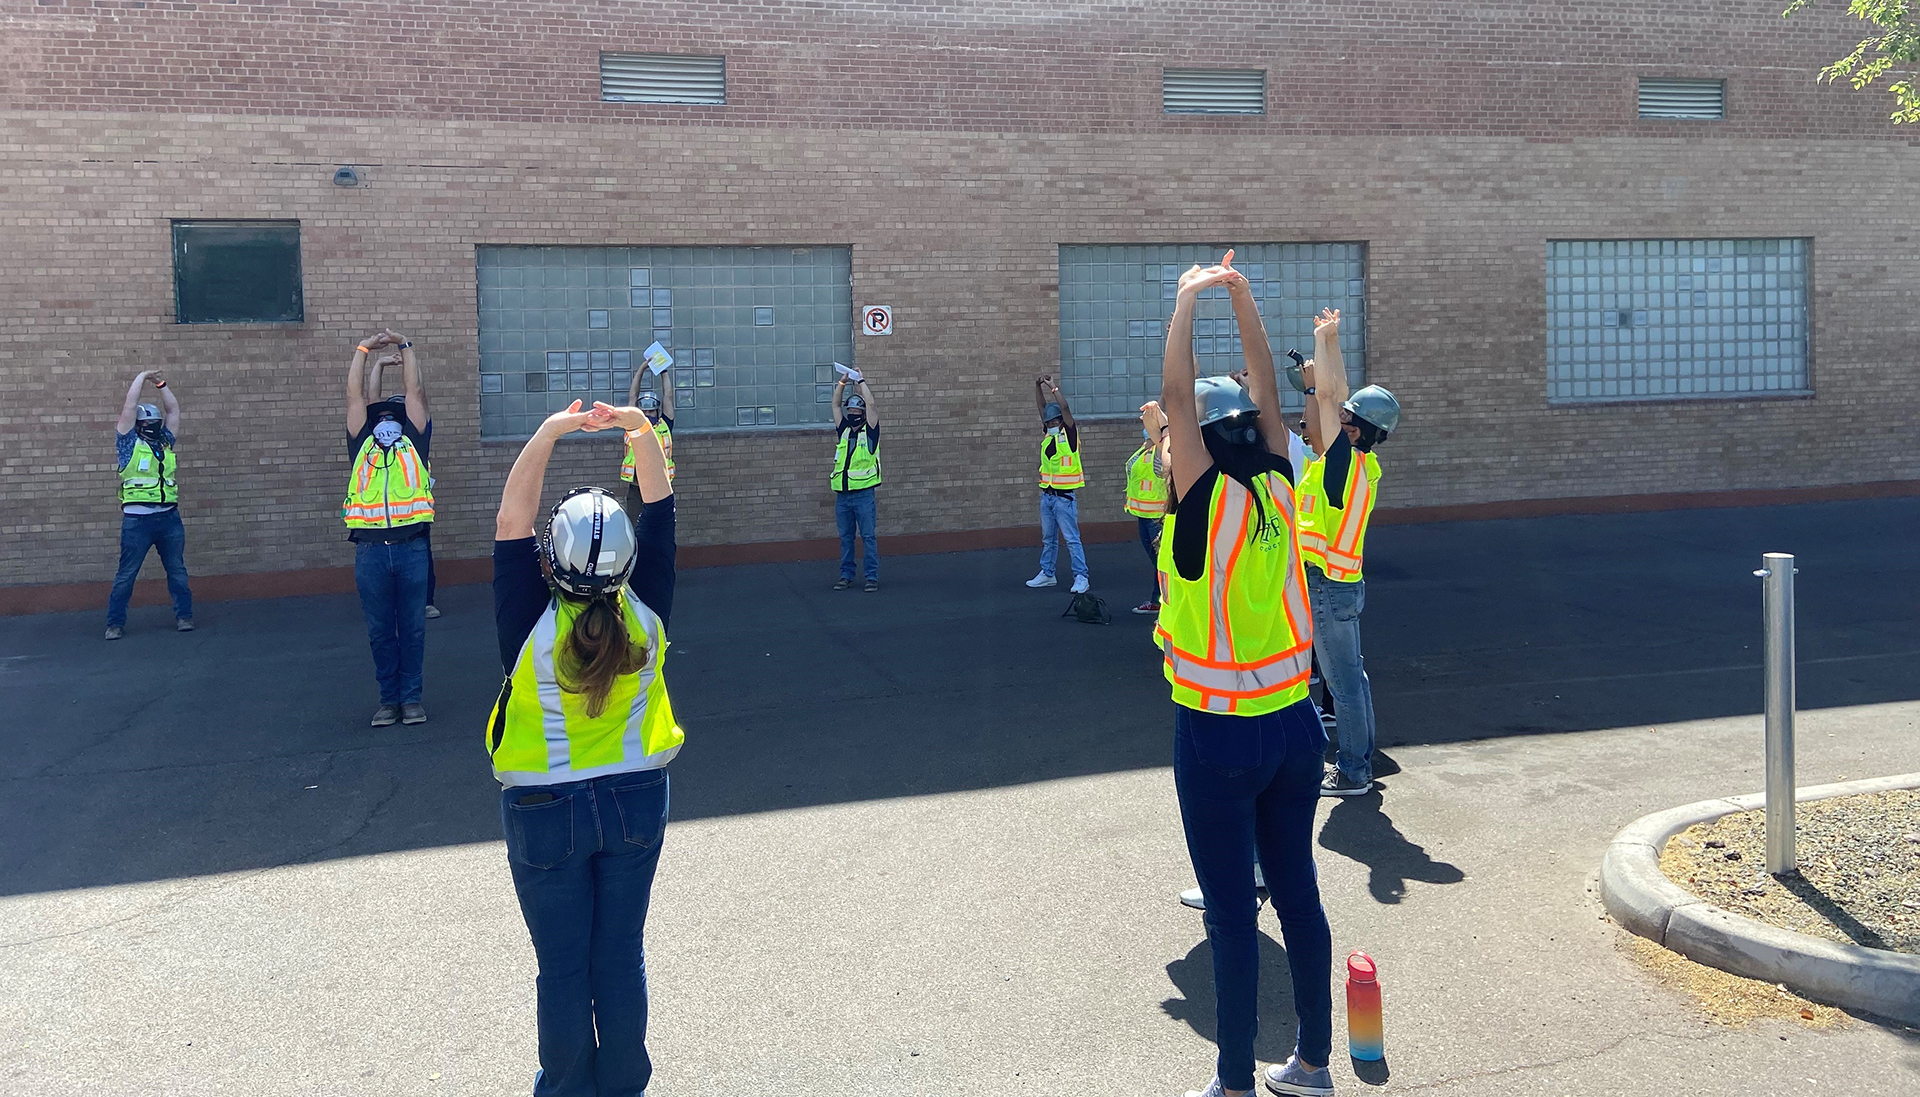 Students stretch before walking the jobsite.